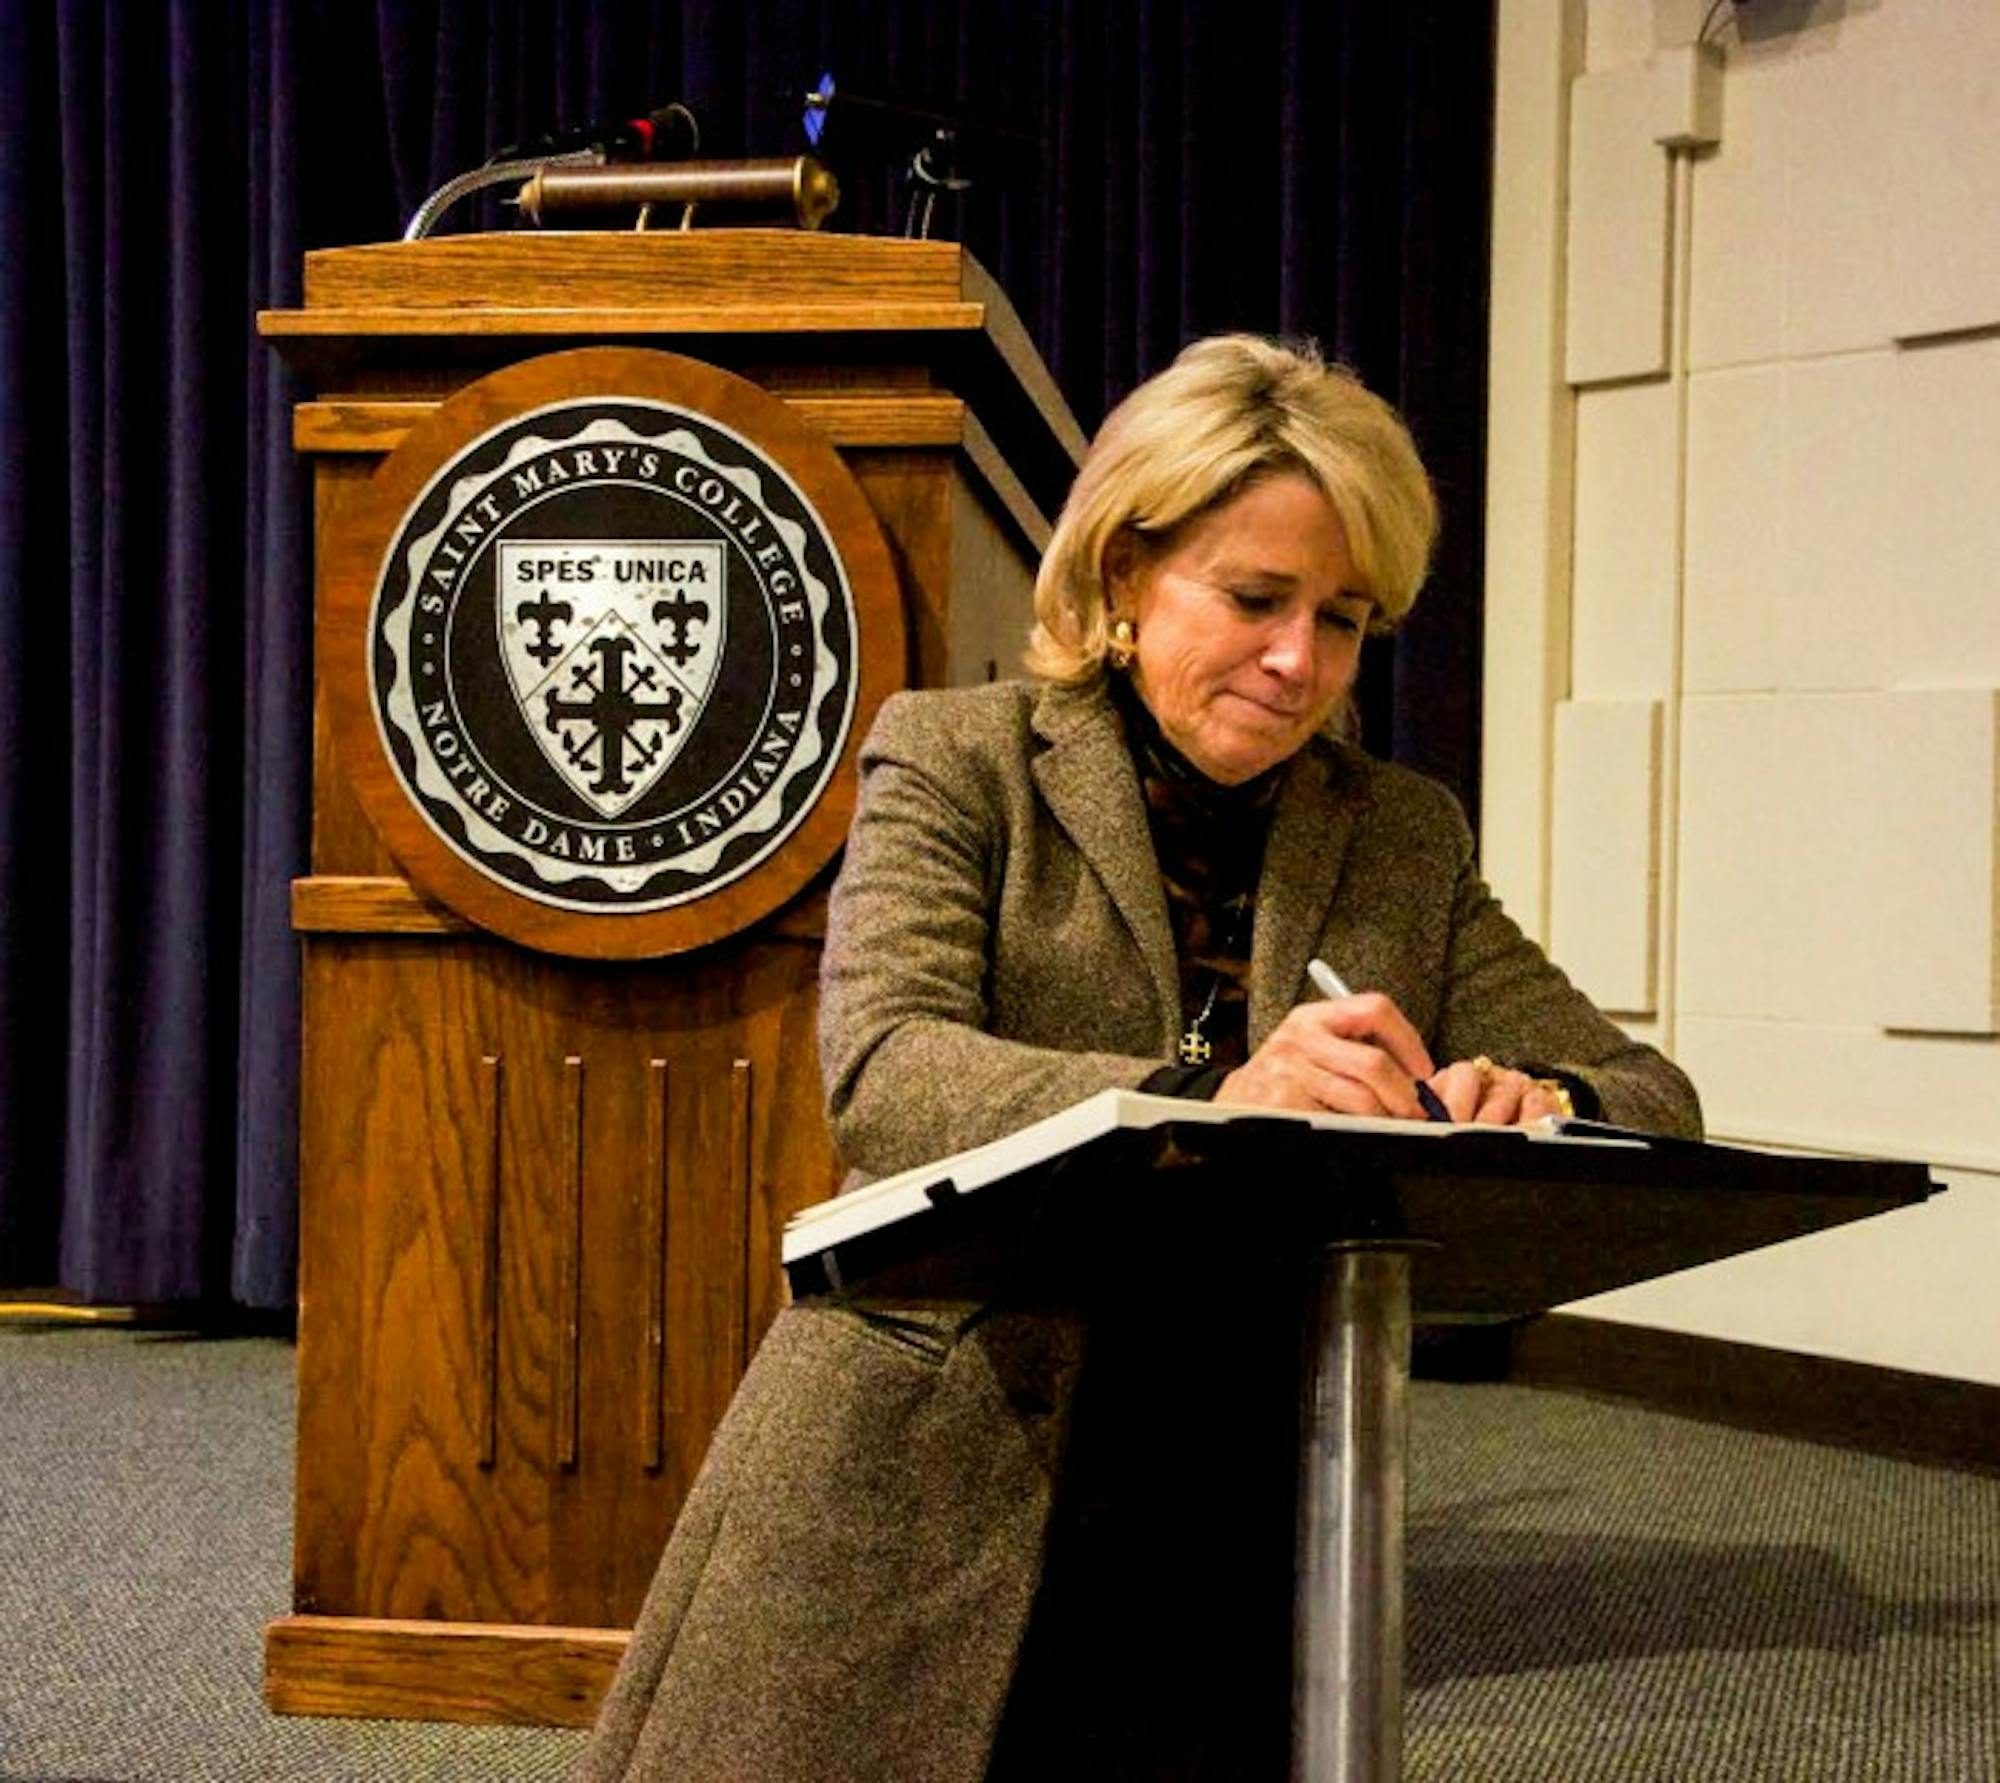 Saint Mary’s president Jan Cervelli signs the It’s On Us pledge to work towards ending sexual assault on college campuses at the town hall forum Monday night.